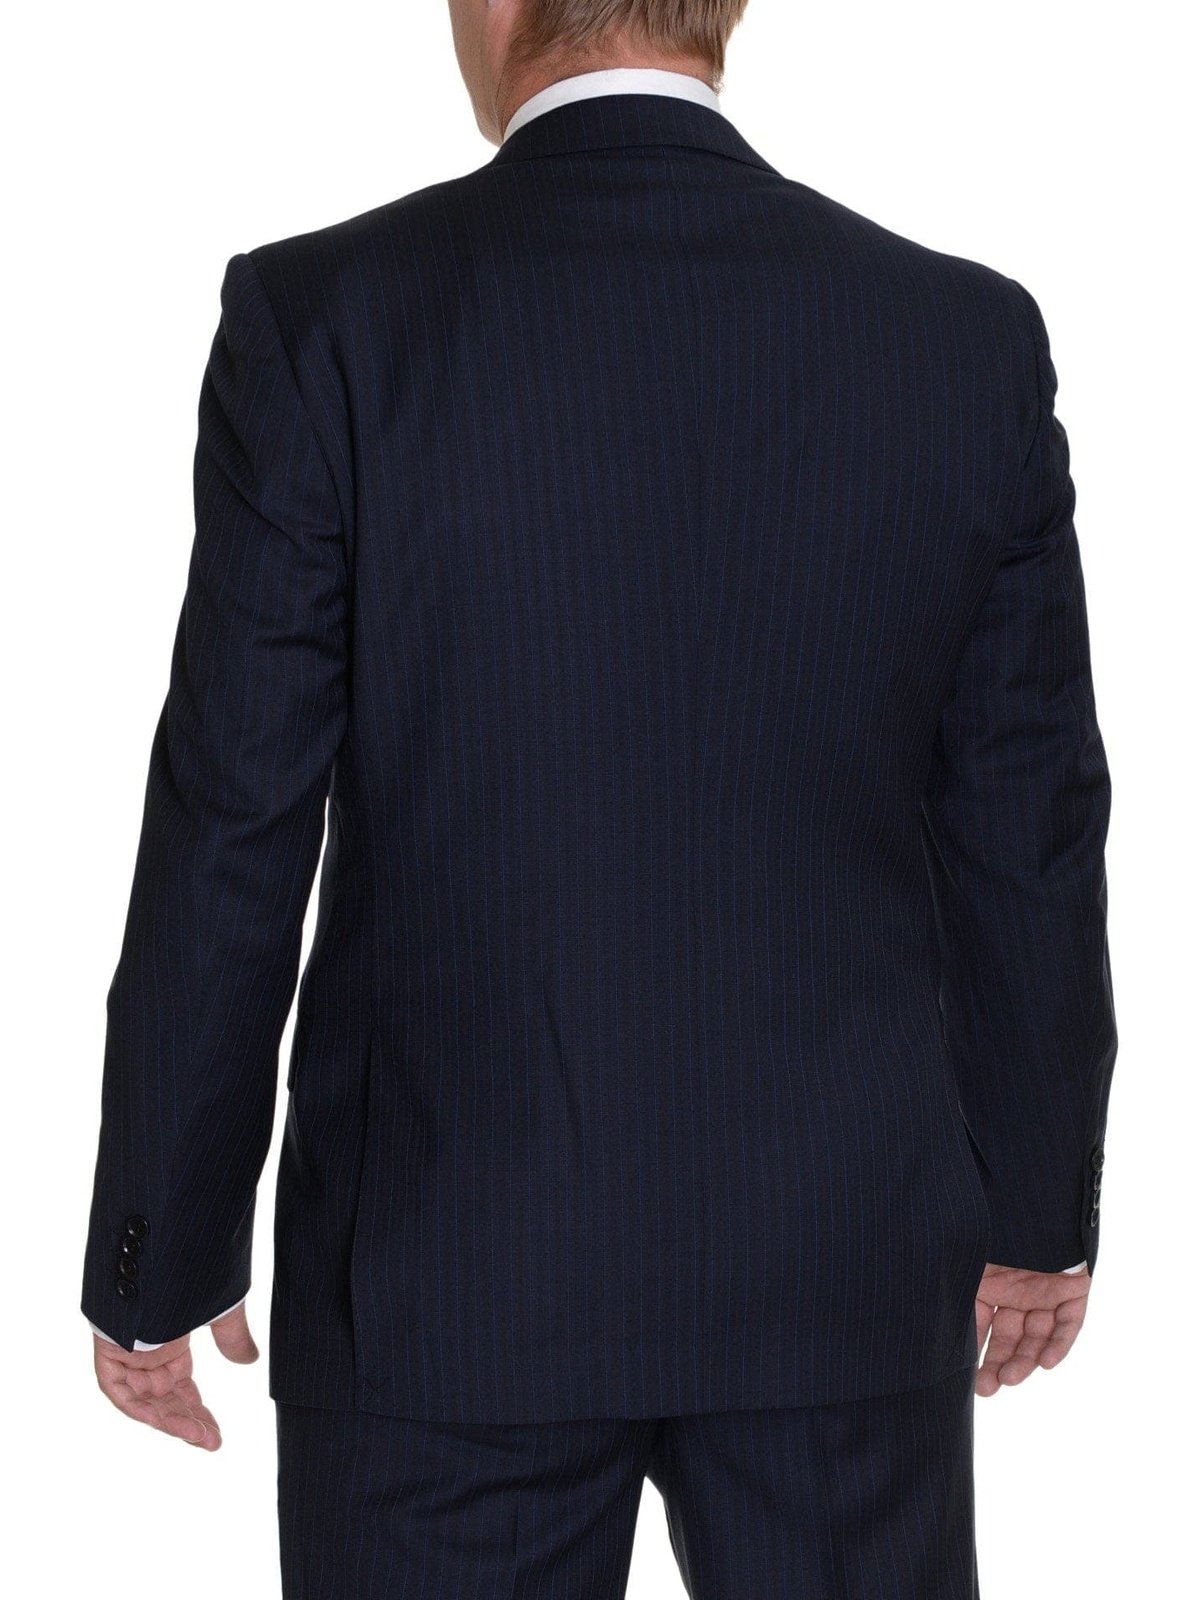 Label E TWO PIECE SUITS Modern Fit Navy Blue Pinstriped Two Button Wool Suit